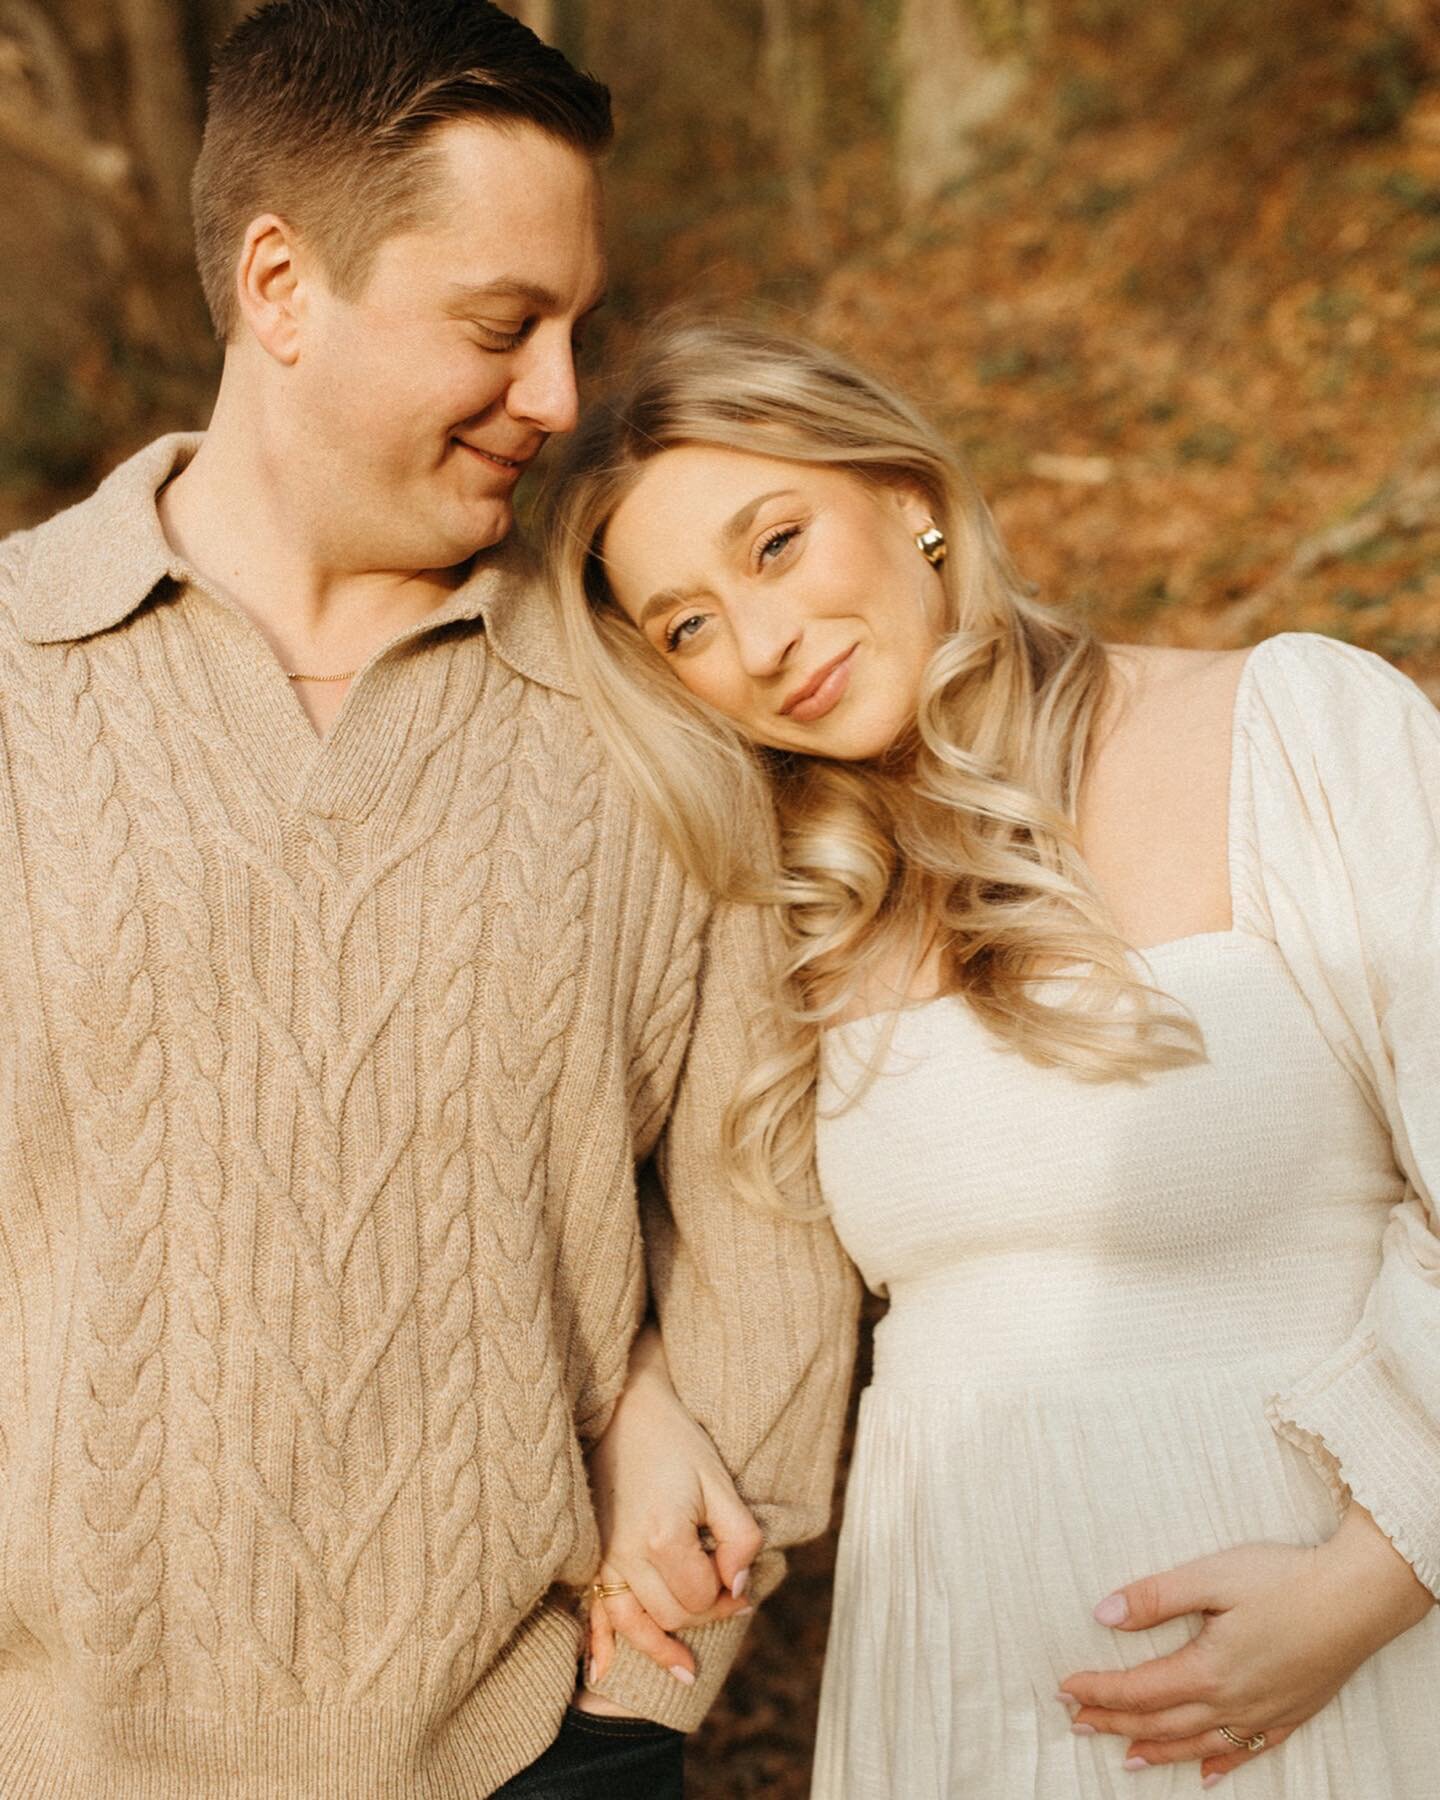 when that mama glow is glowing ✨ this winter beach maternity session needed a place on the feed.

#maternityphotography #maternityphotoshoot #seattlephotographer #seattleweddingphotographer #familyphotographer #couplesphotographer